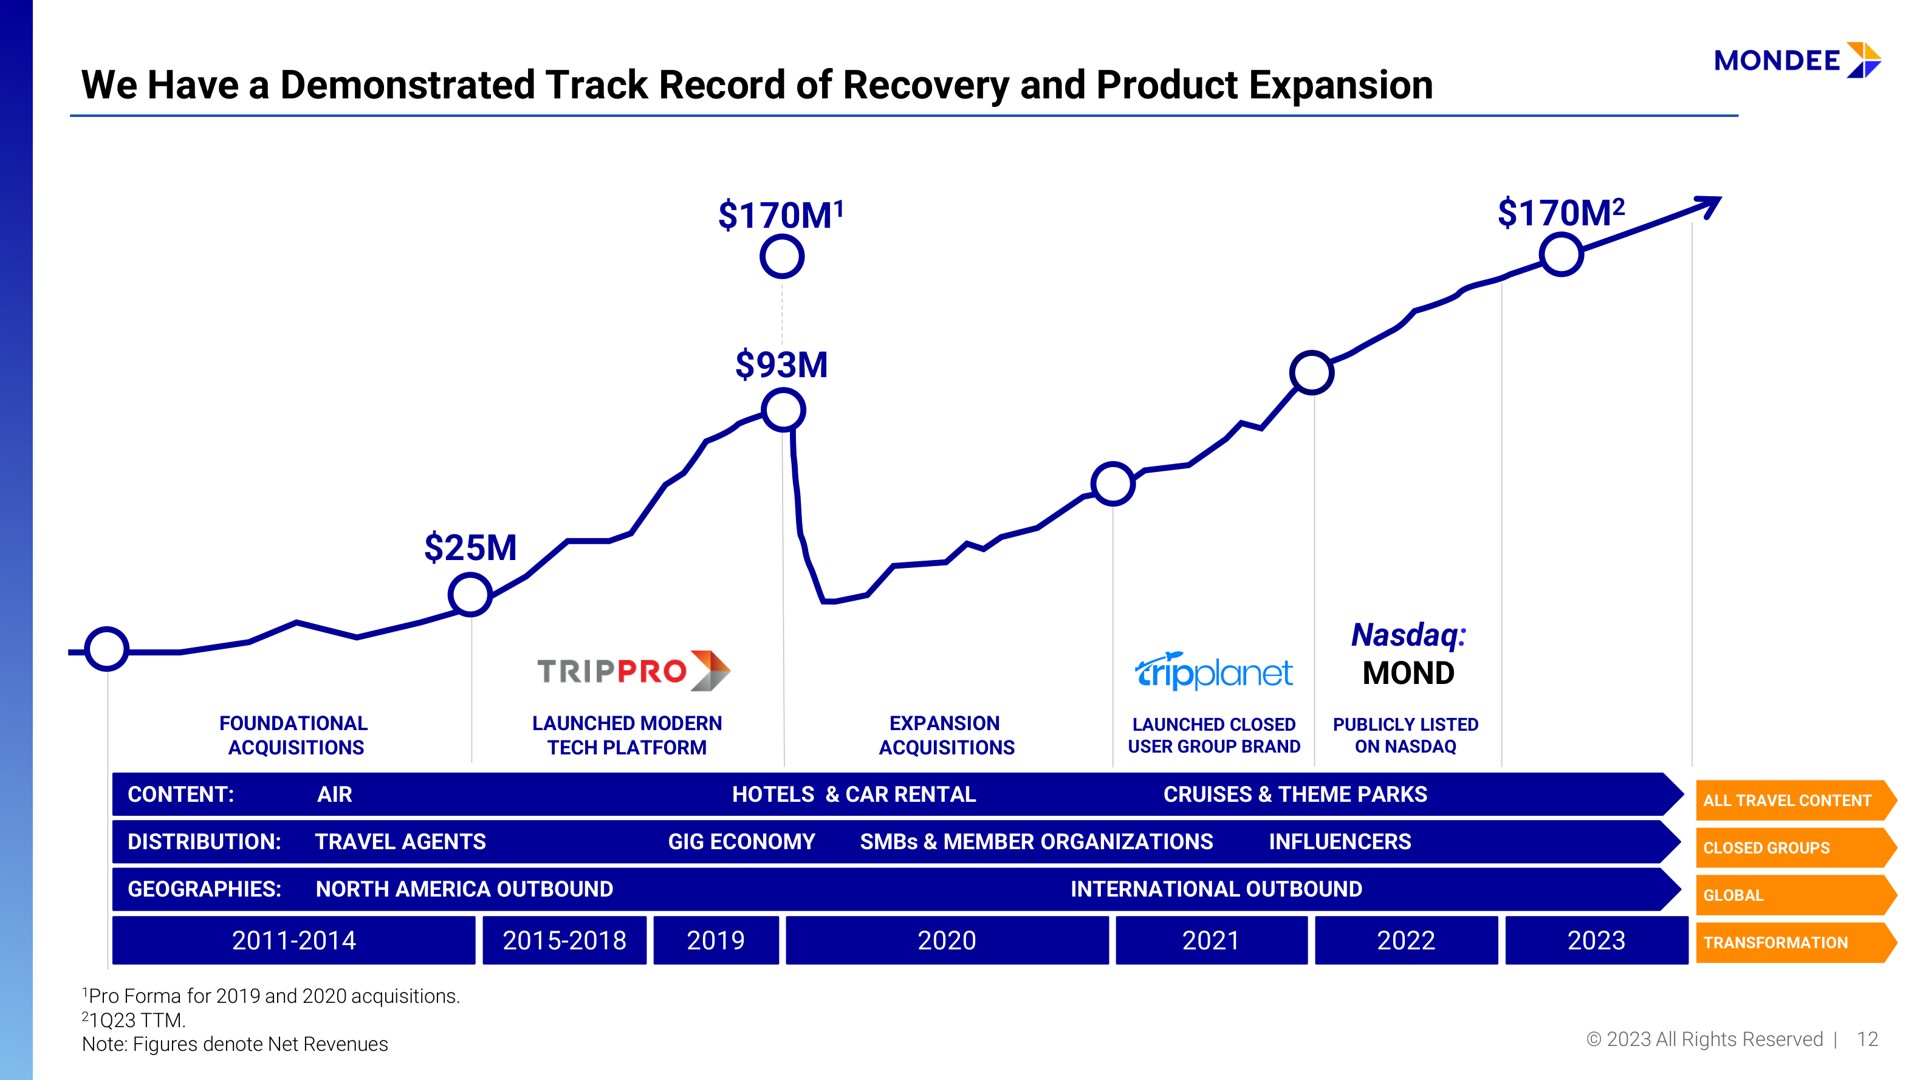 we have a demonstrated track record of recovery and product expansion | Mondee